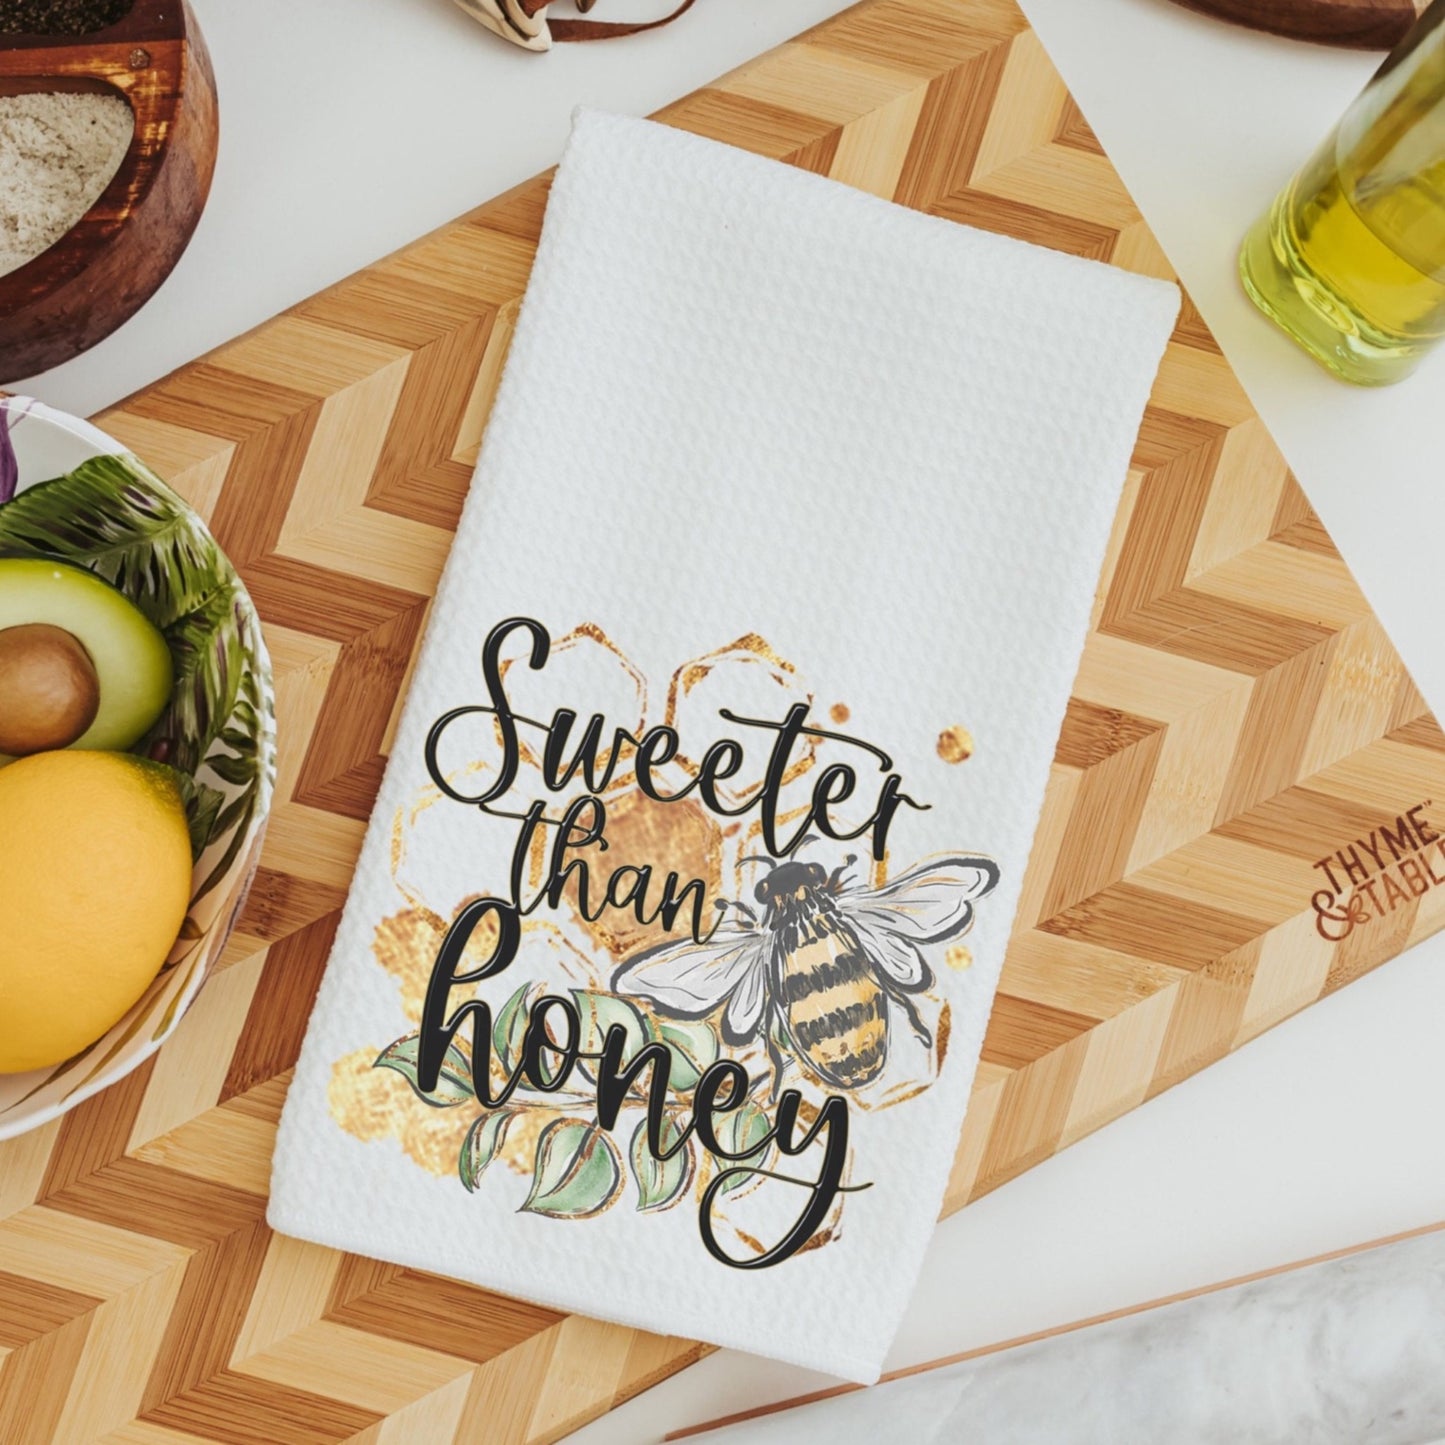 Sweeter Than Honey Pillow and Towel Gift Set